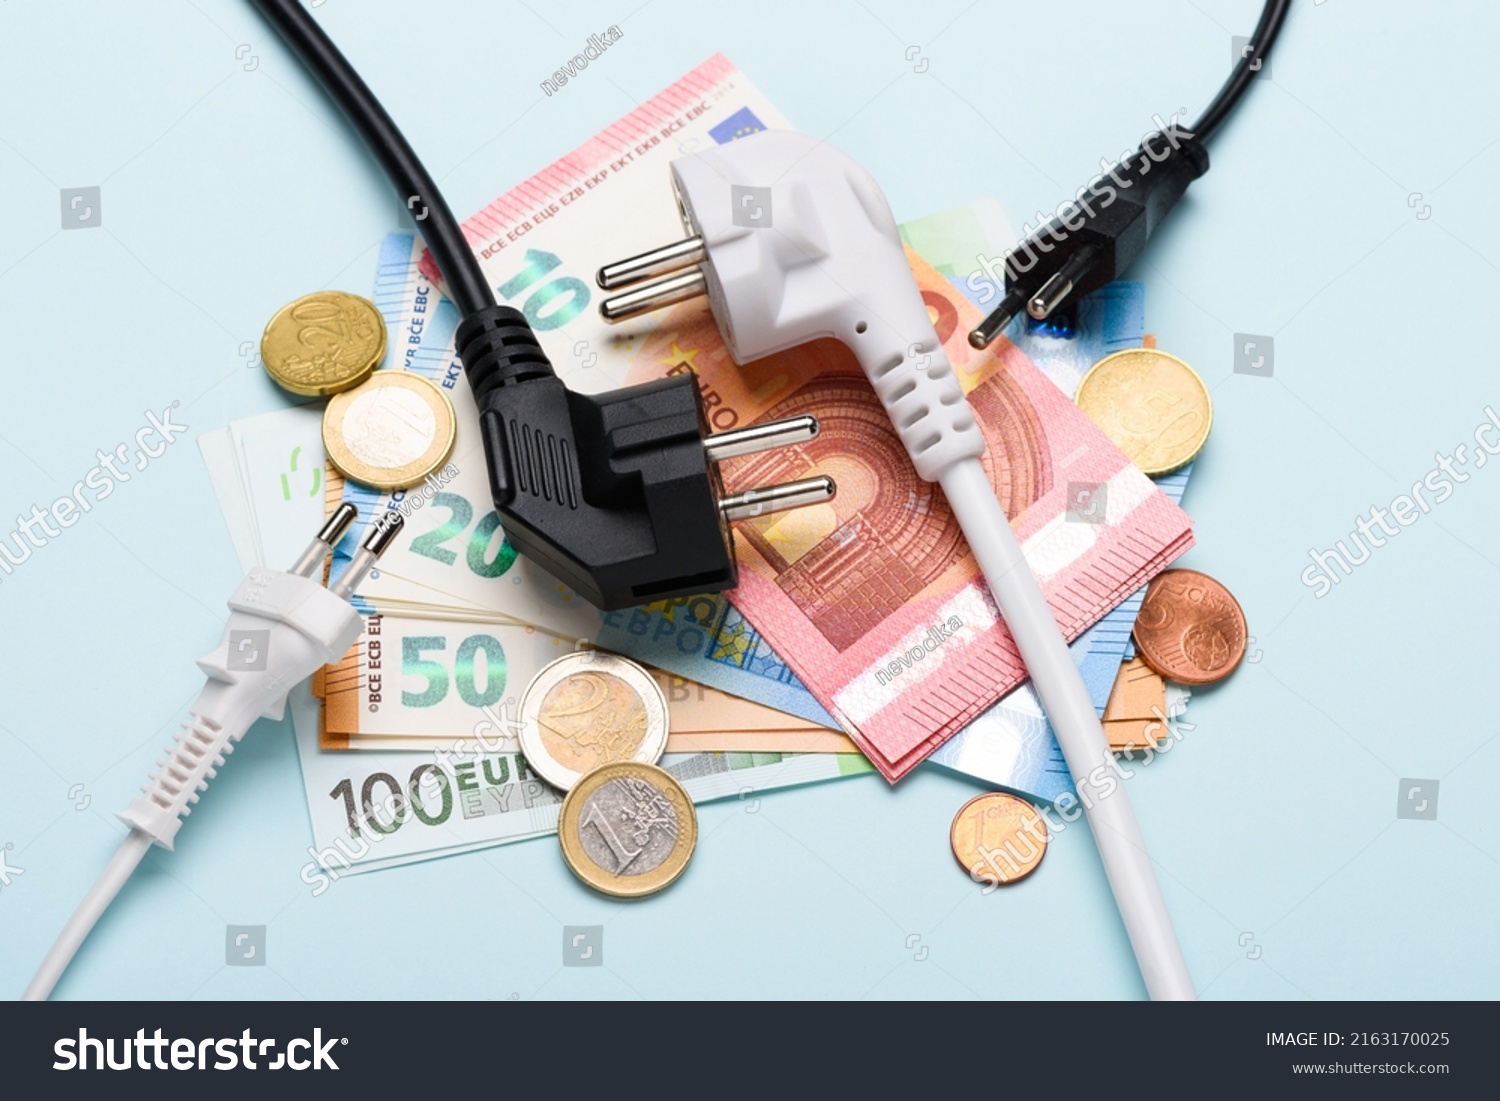 Electric power plugs on Euro banknotes on blue background. Concept of expensive electricity costs and rise in energy bill prices. #2163170025